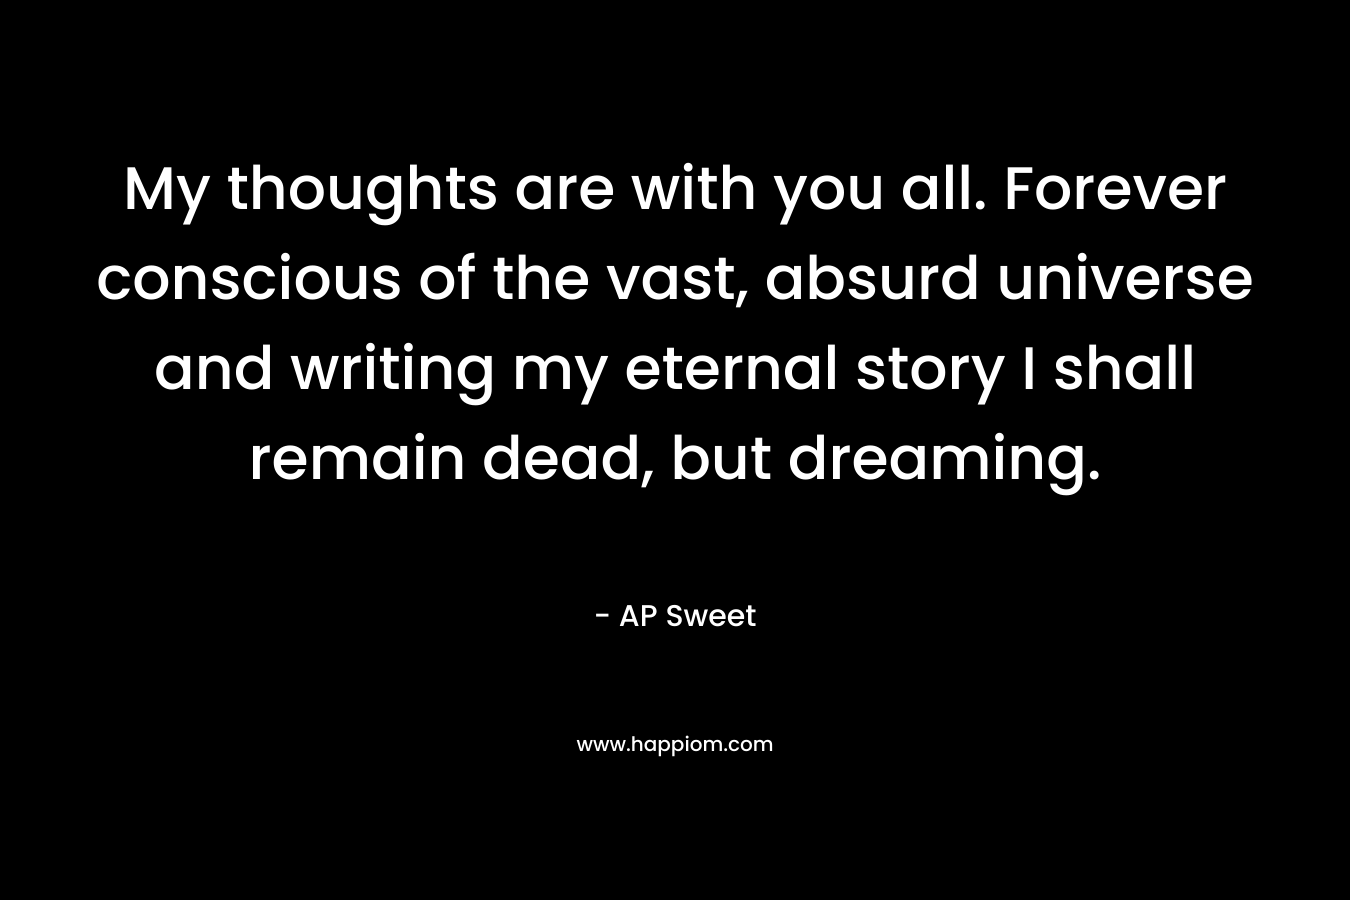 My thoughts are with you all. Forever conscious of the vast, absurd universe and writing my eternal story I shall remain dead, but dreaming. – AP Sweet